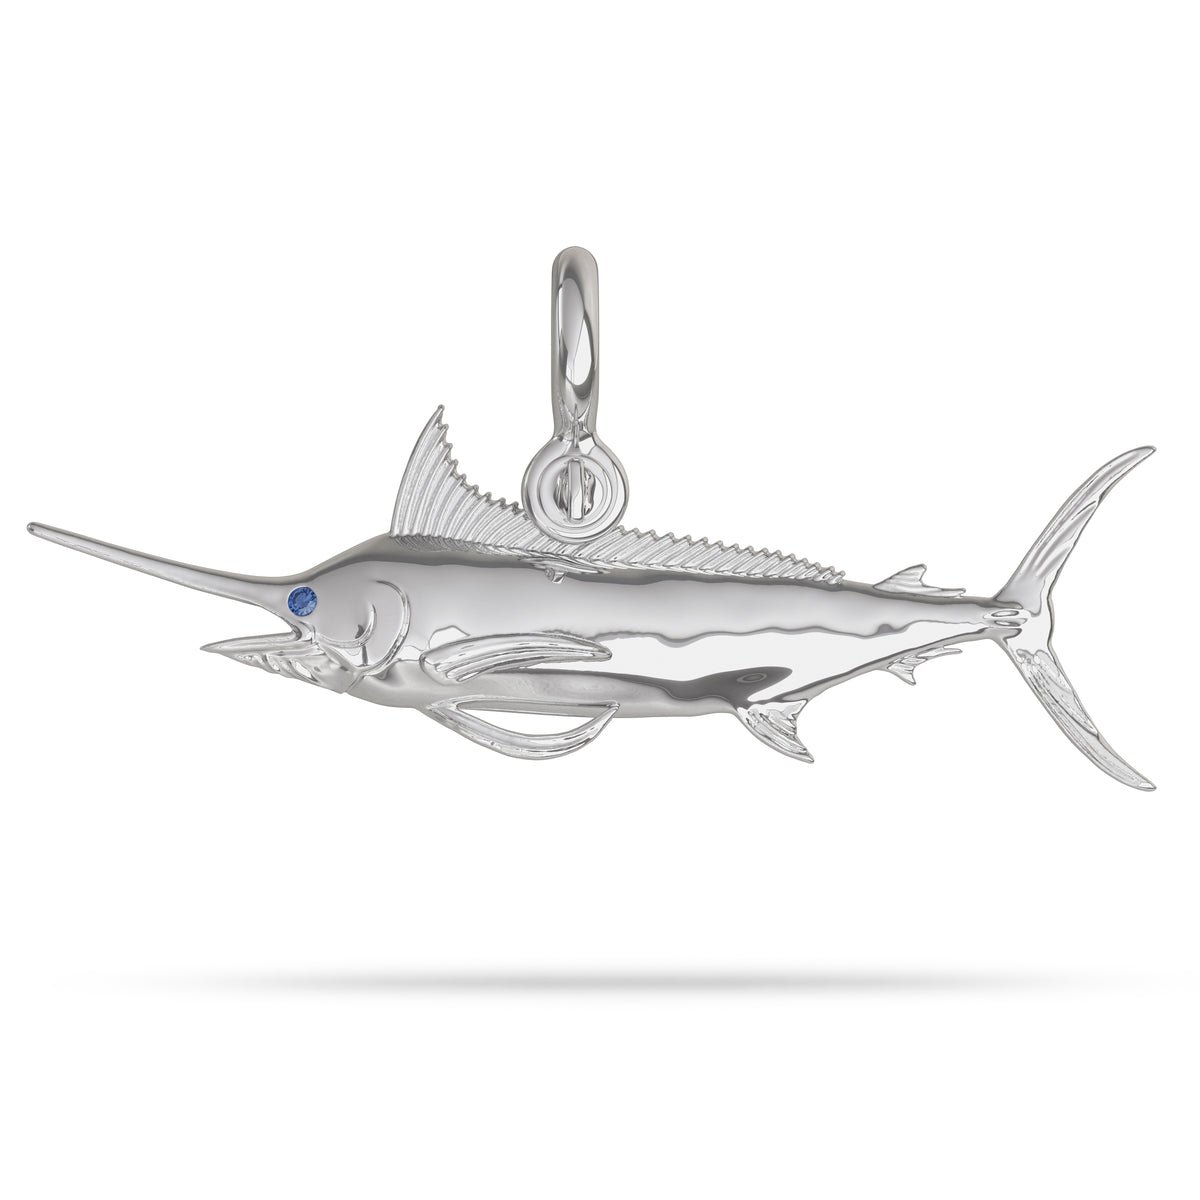 Sterling Silver Blue Marlin Jewelry Pendant High Polished Mirror Finish With Blue Sapphire Eye with A Mariner Shackle Bail Custom Designed By Nautical Treasure Jewelry In The Florida Keys Open From Hemingway Book Old Man and the Sea